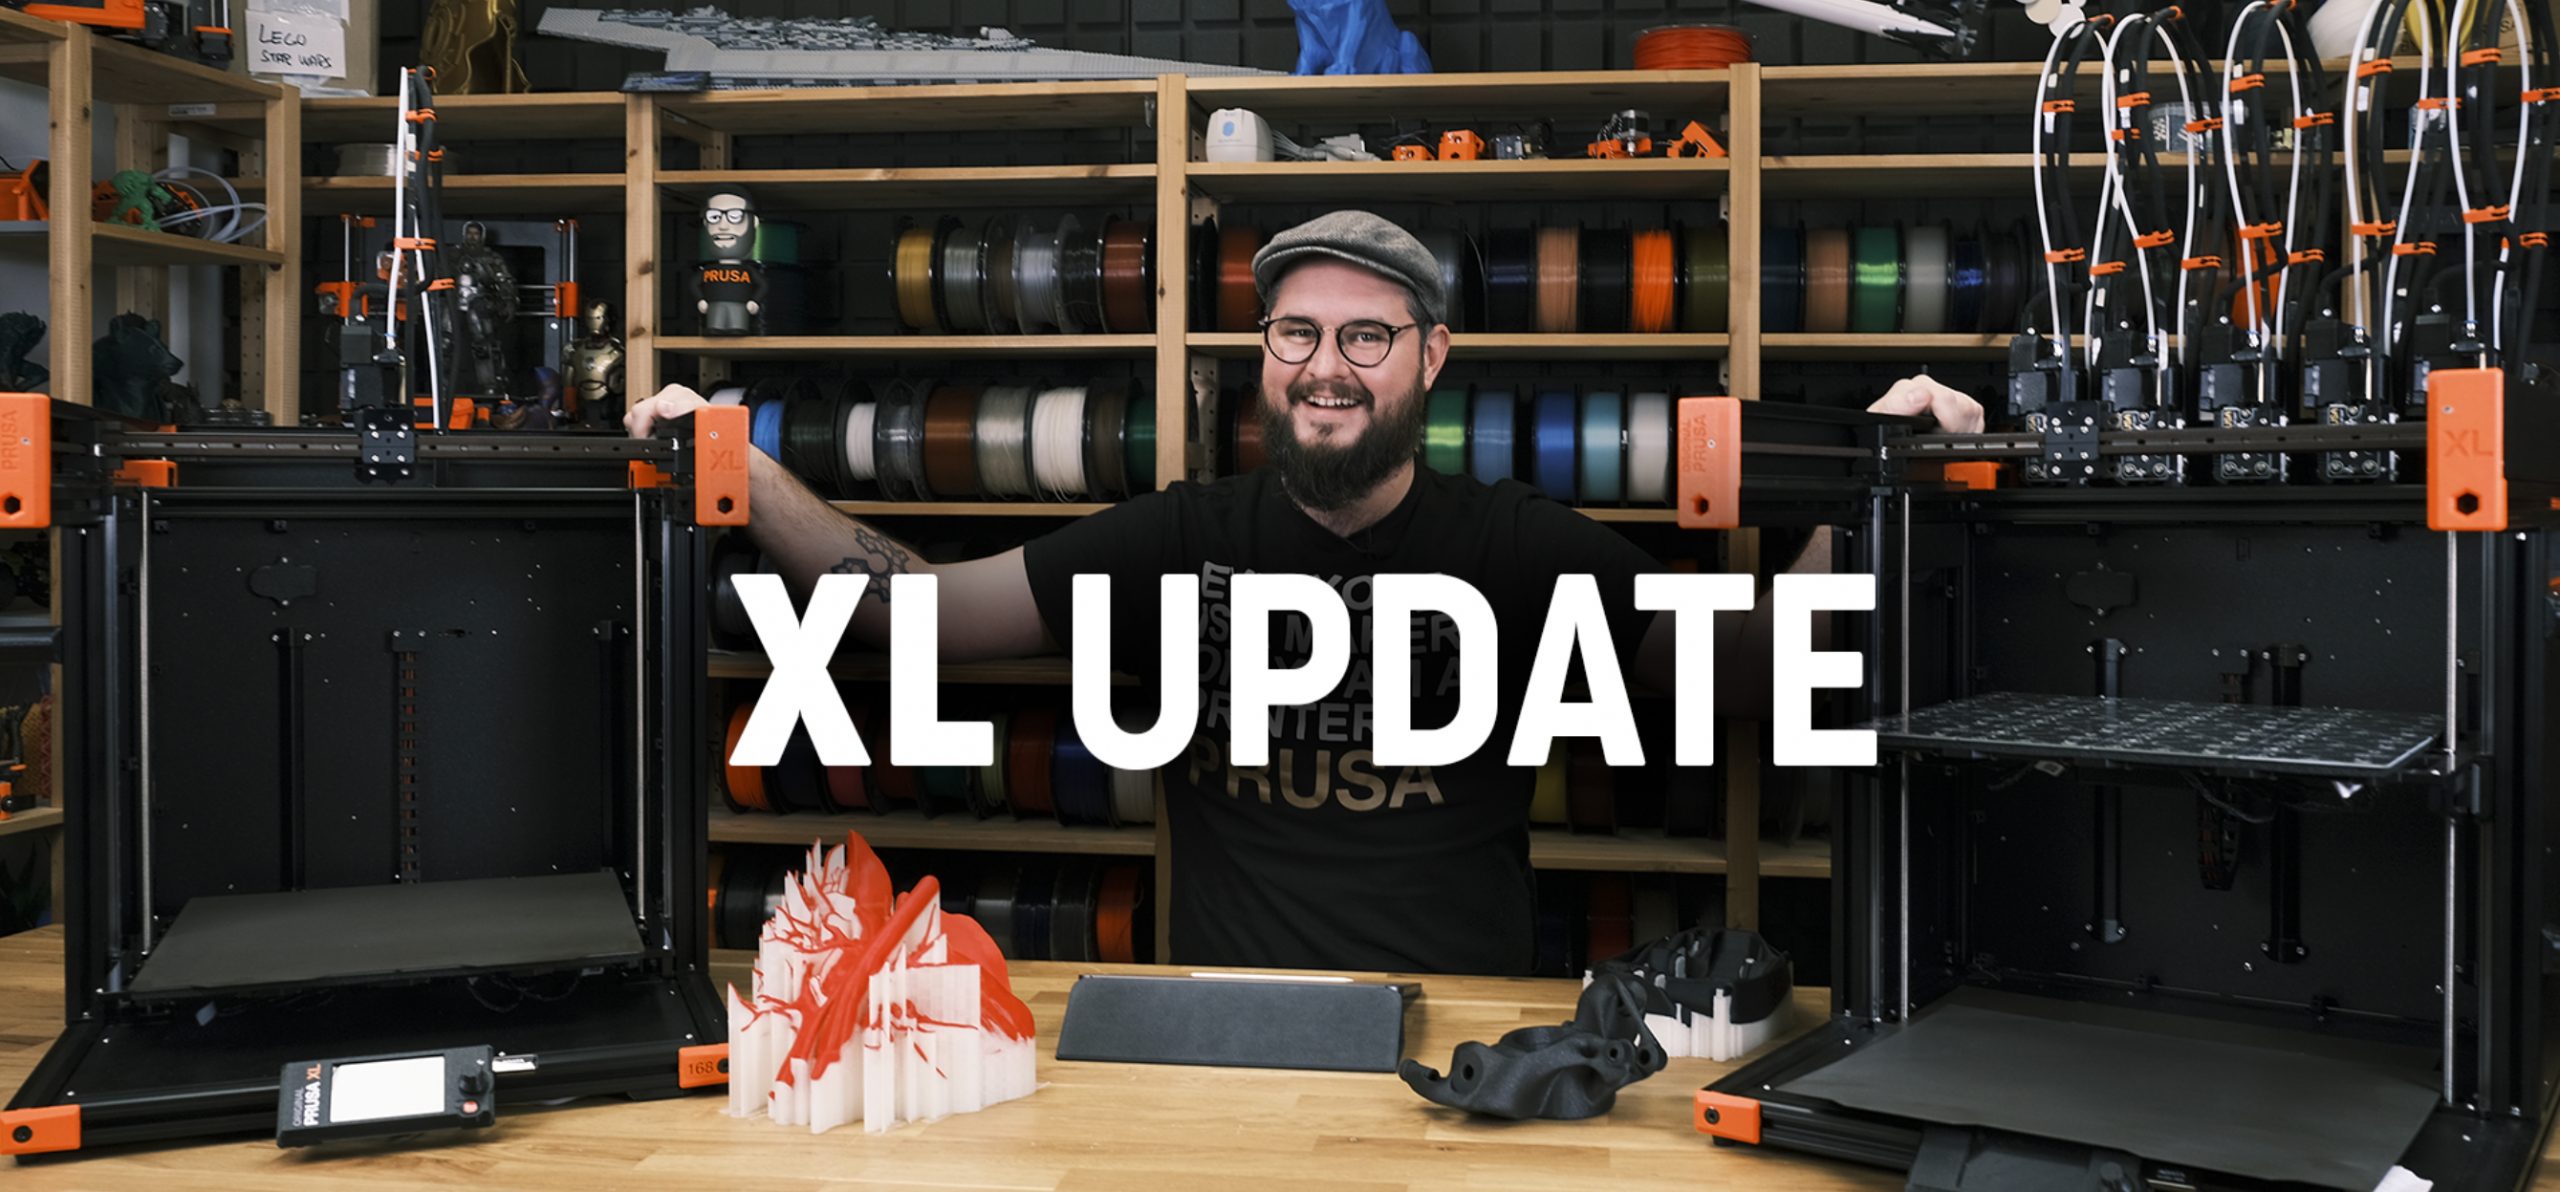 Prusa XL Review - Worth the wait? 